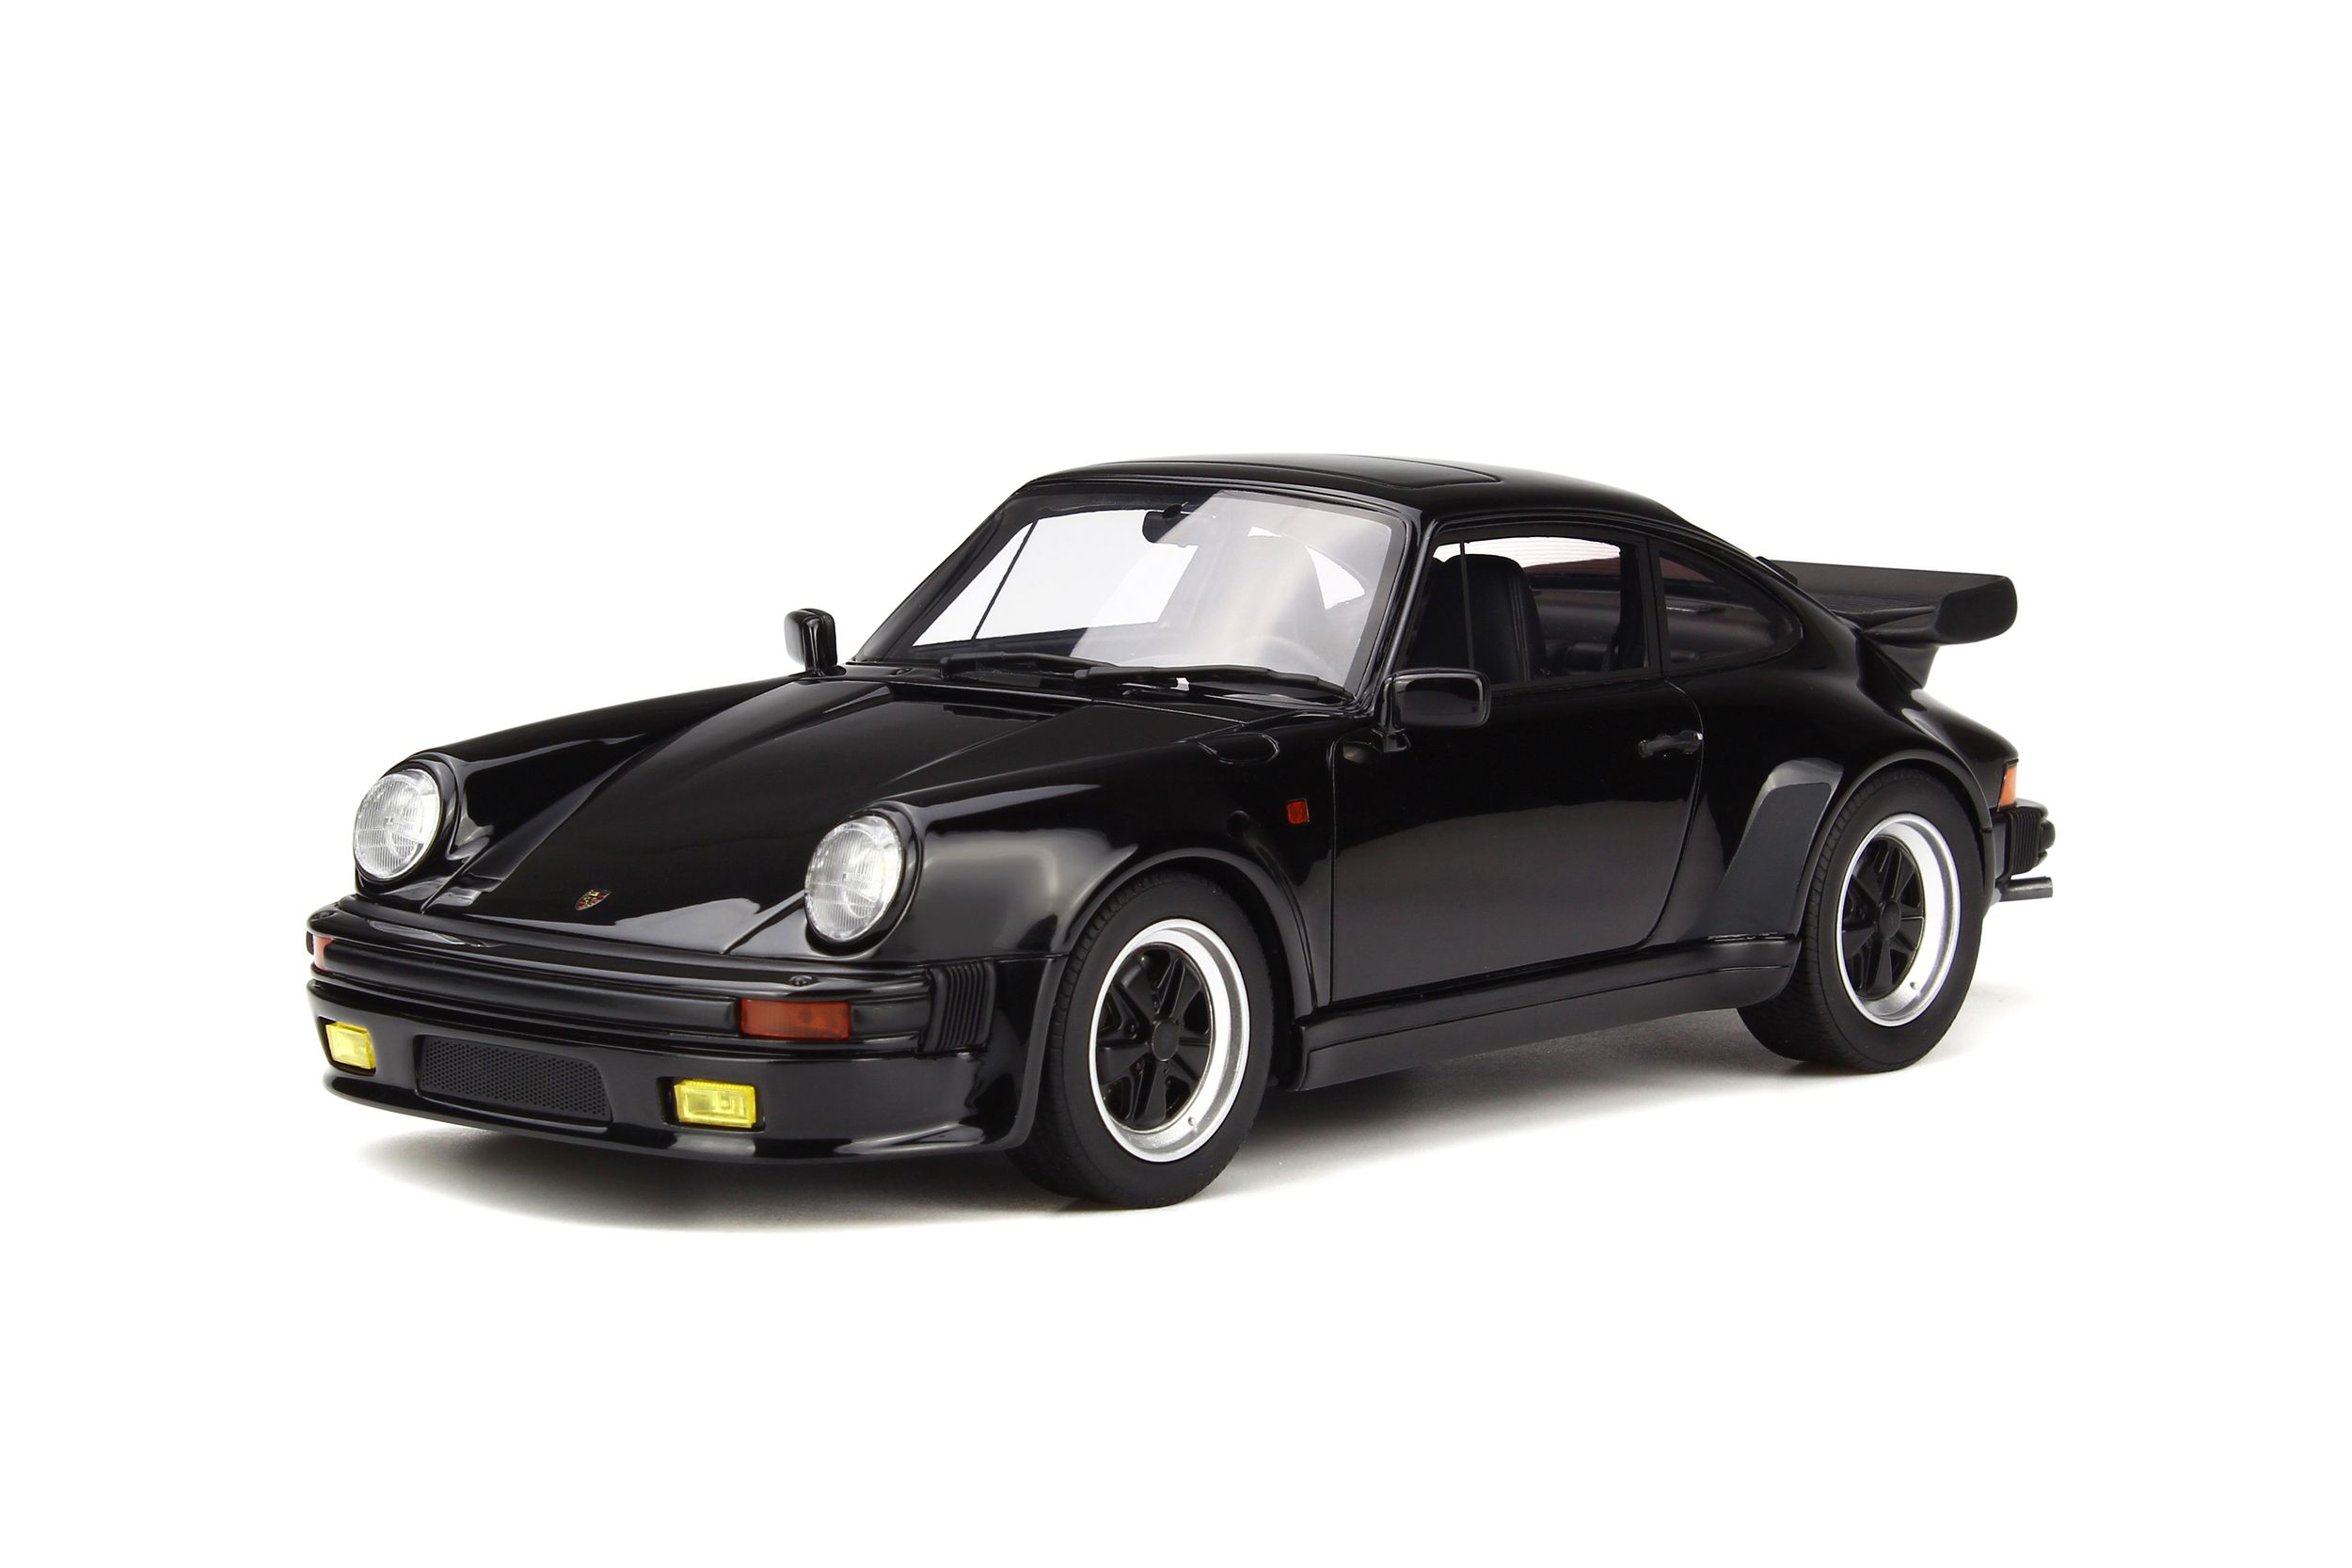 Share 111+ images porsche 911 turbo s toy car - In.thptnganamst.edu.vn